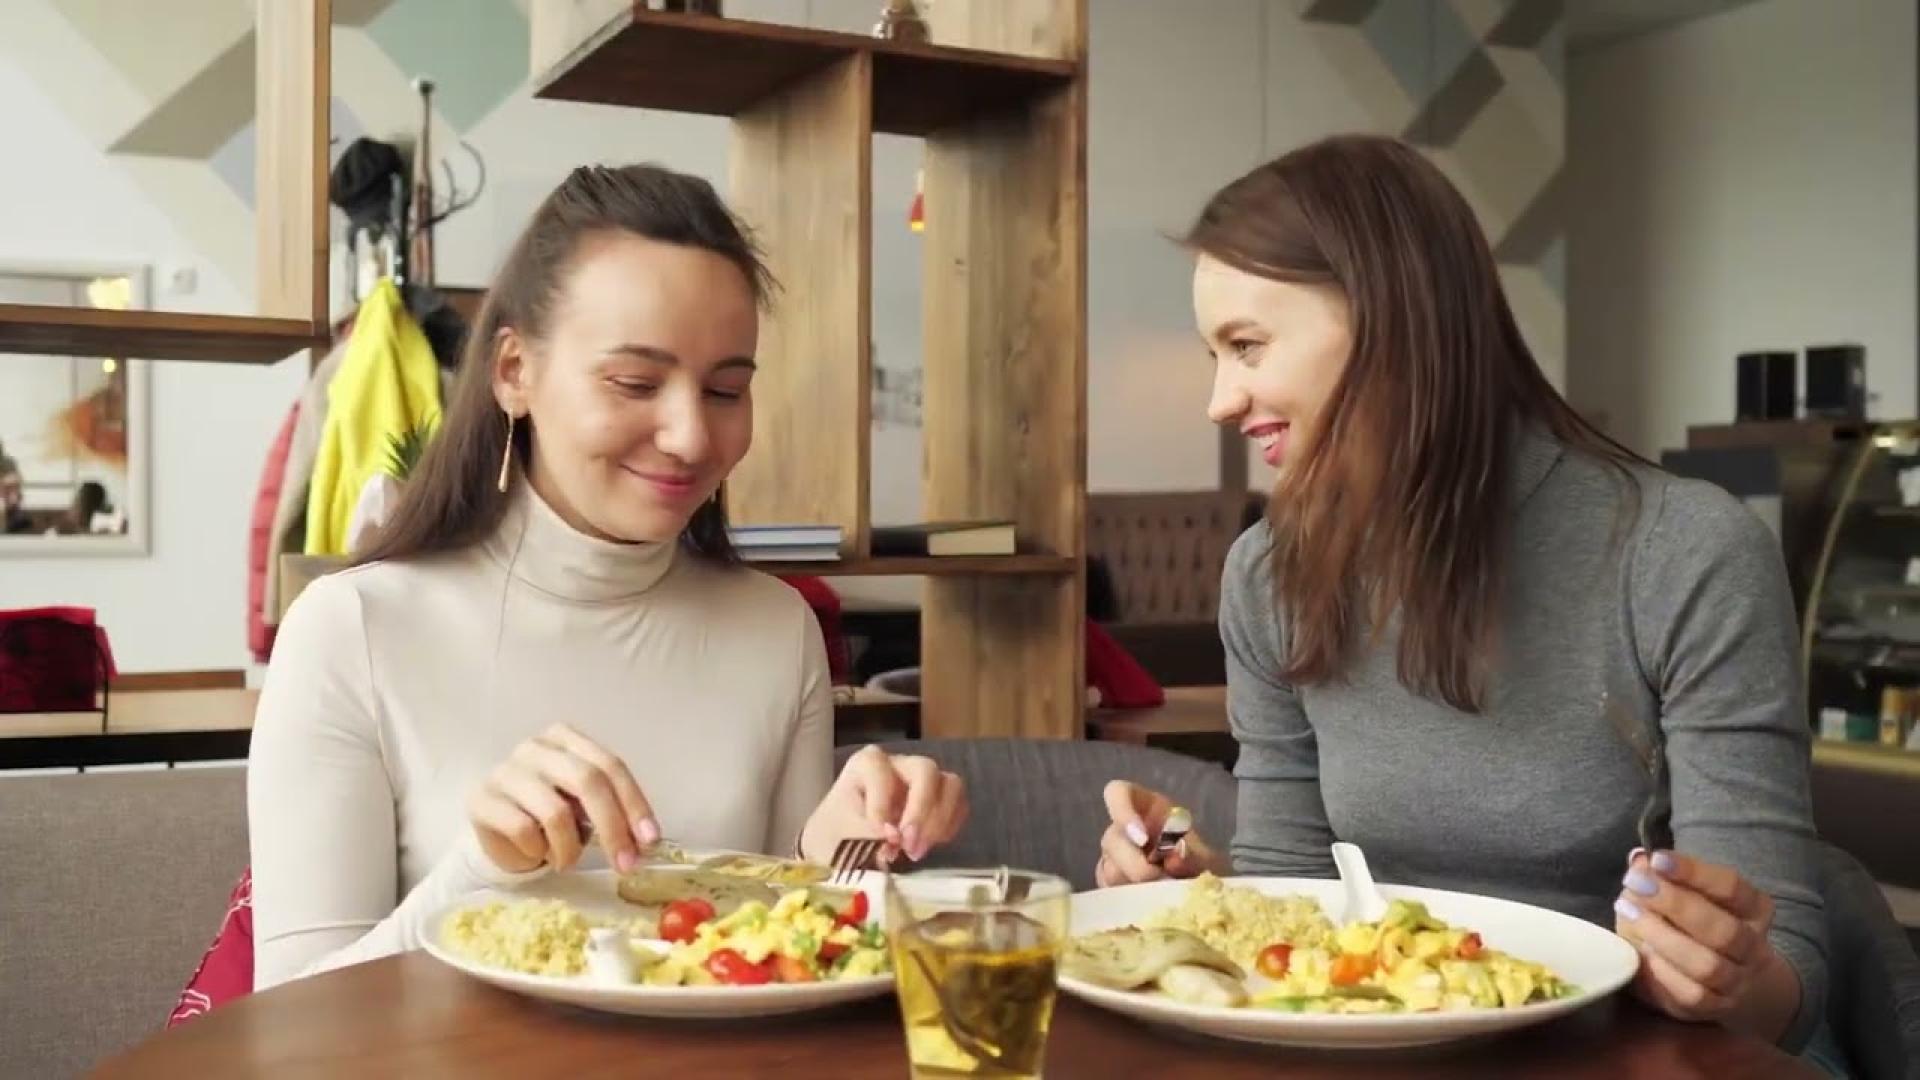 Two people sharing a healthy meal together